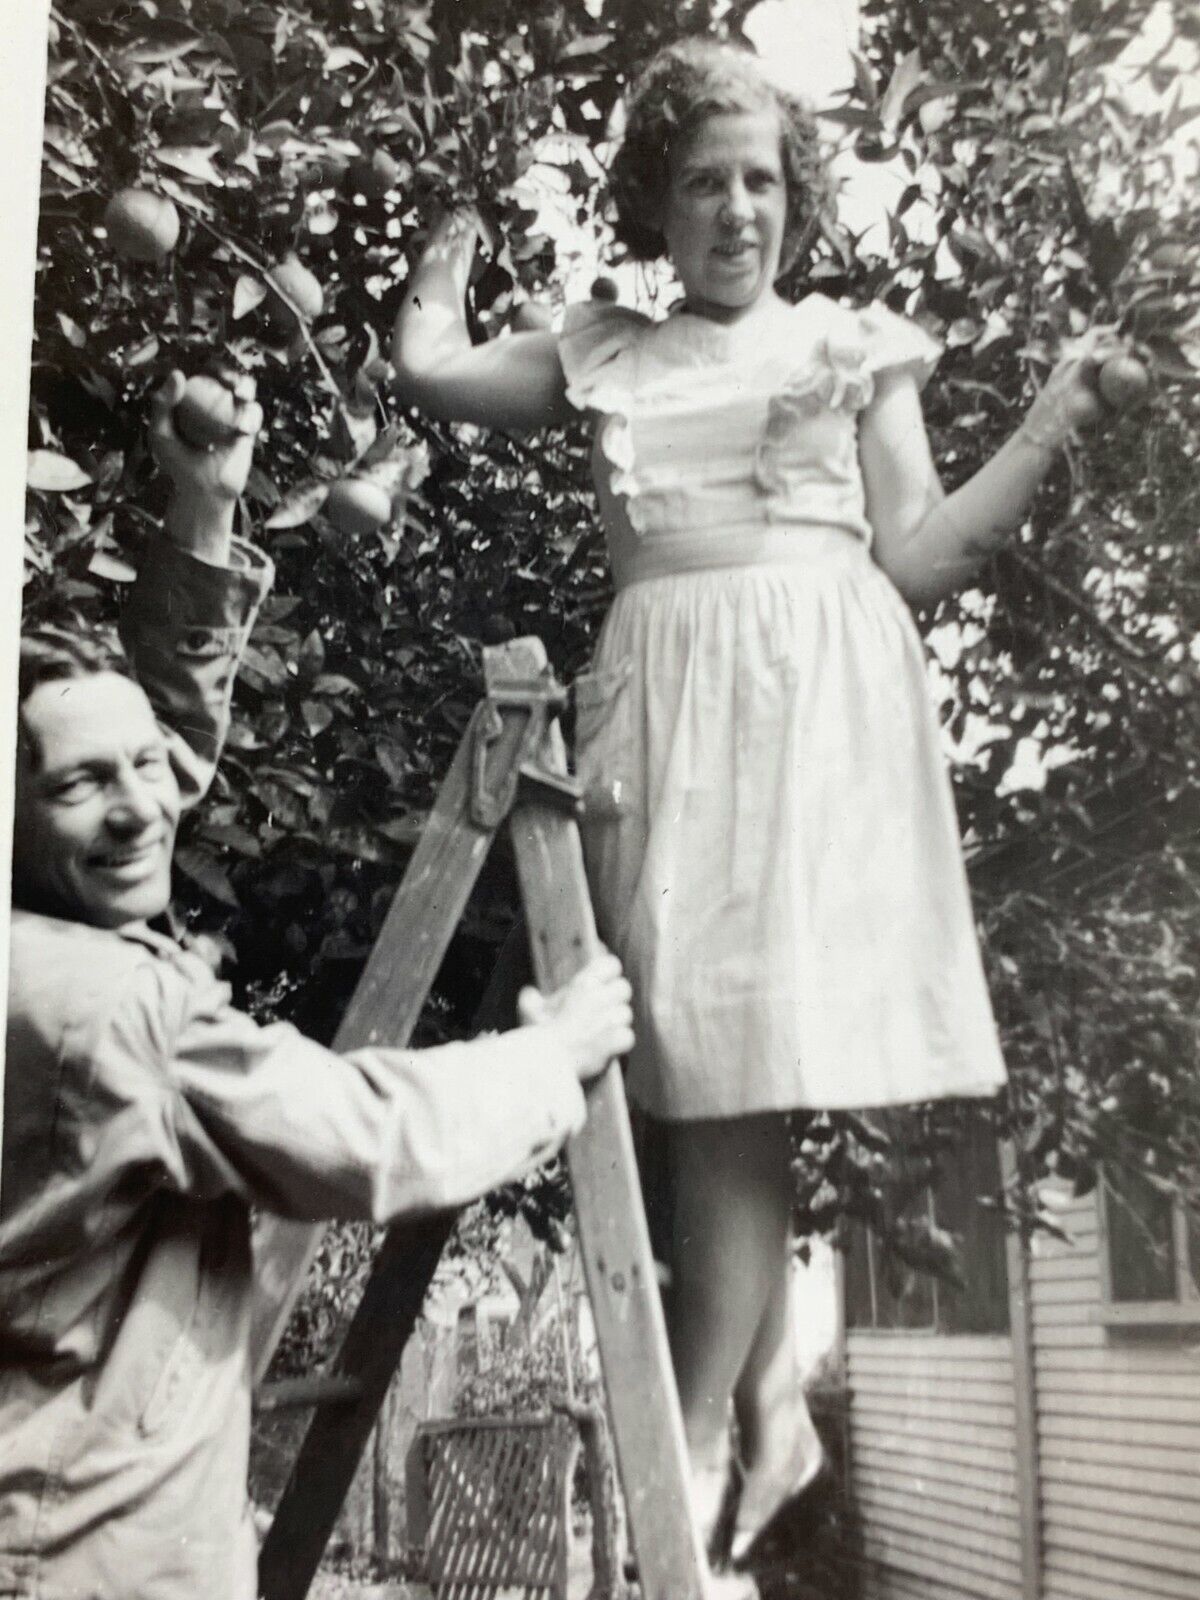 AgG) Found Photo Photograph Cute Couple Woman Up Ladder Dress Picking Peaches